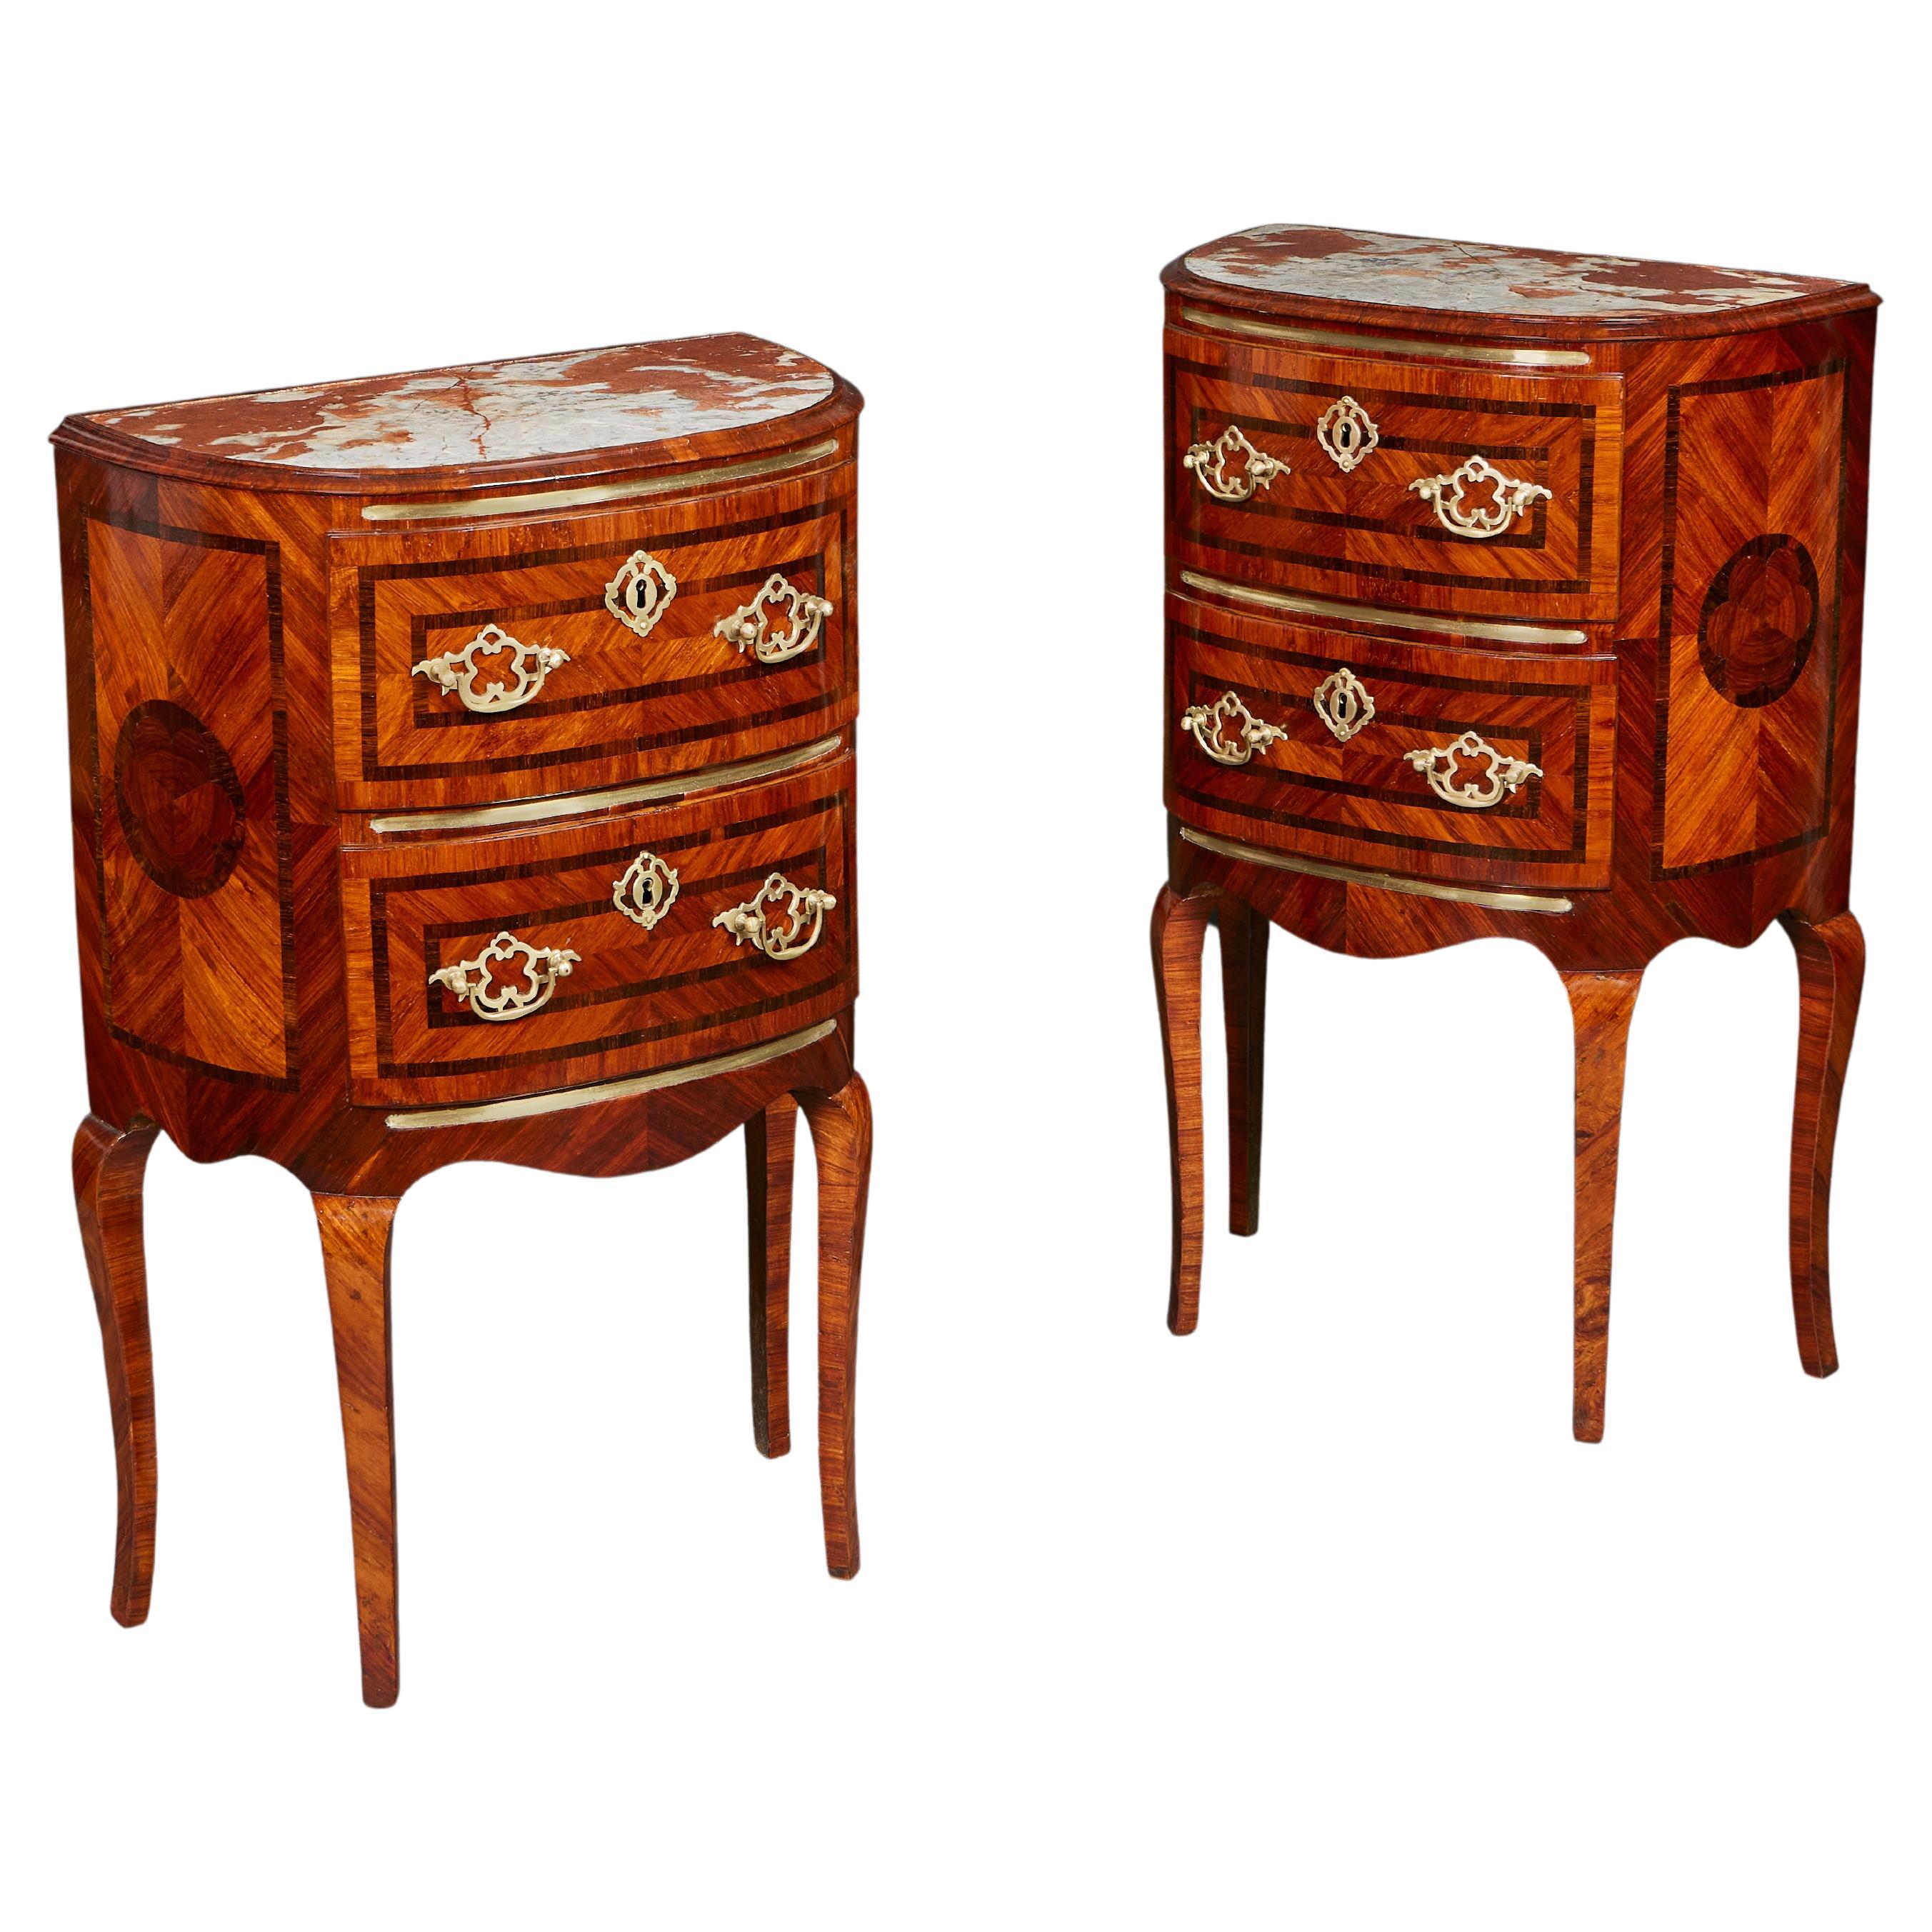 A Pair of 19th Century Roman Bedside Tables with Marquetry and Marble Tops For Sale